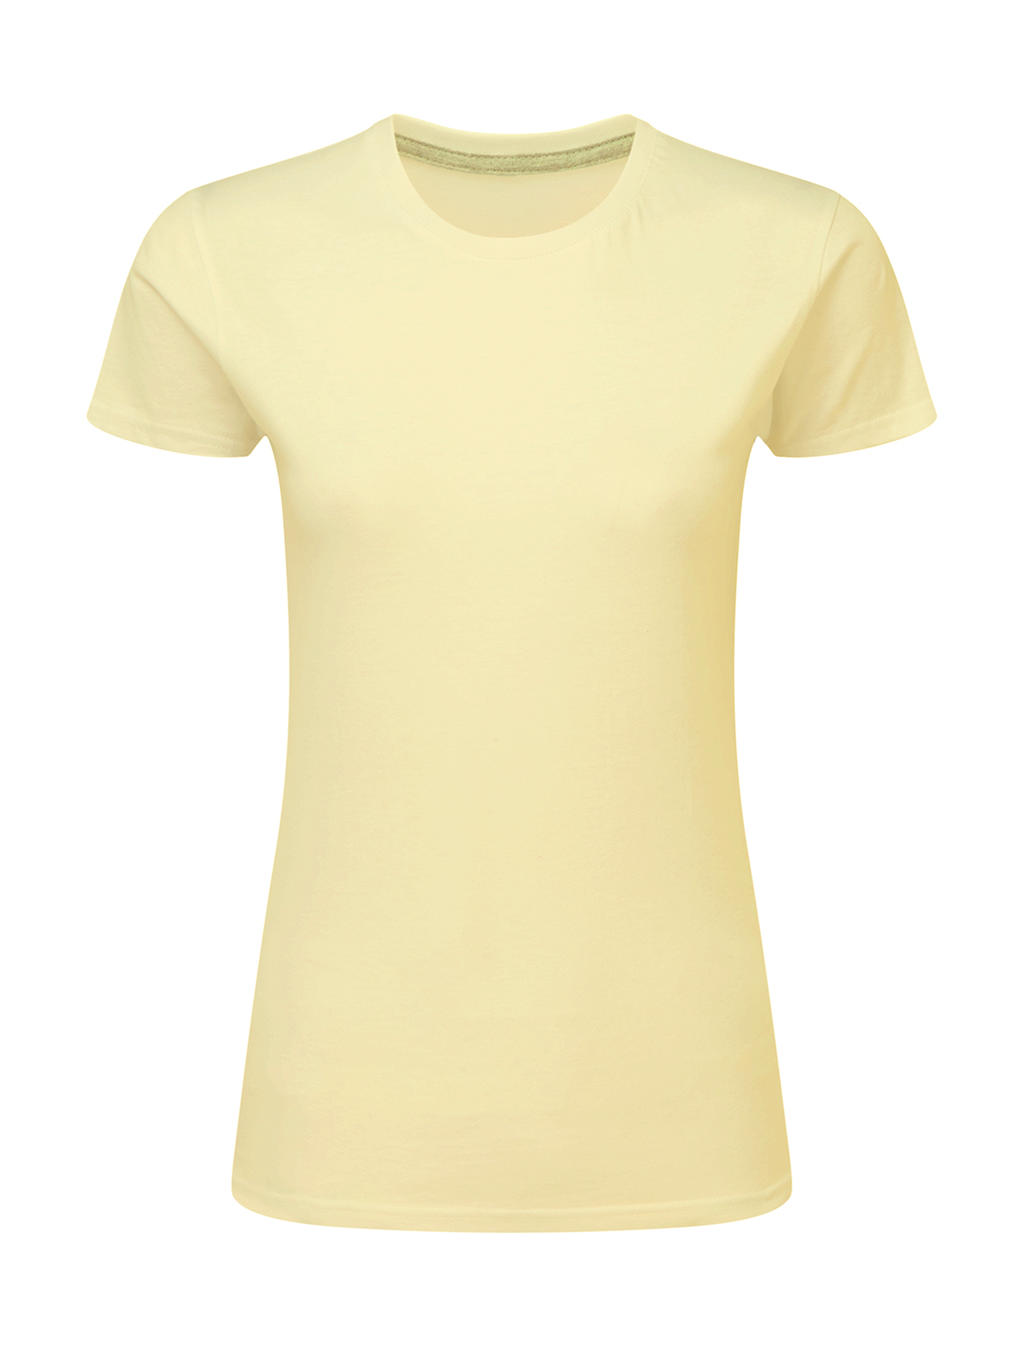  Ladies Perfect Print Tagless Tee in Farbe Anise Flower